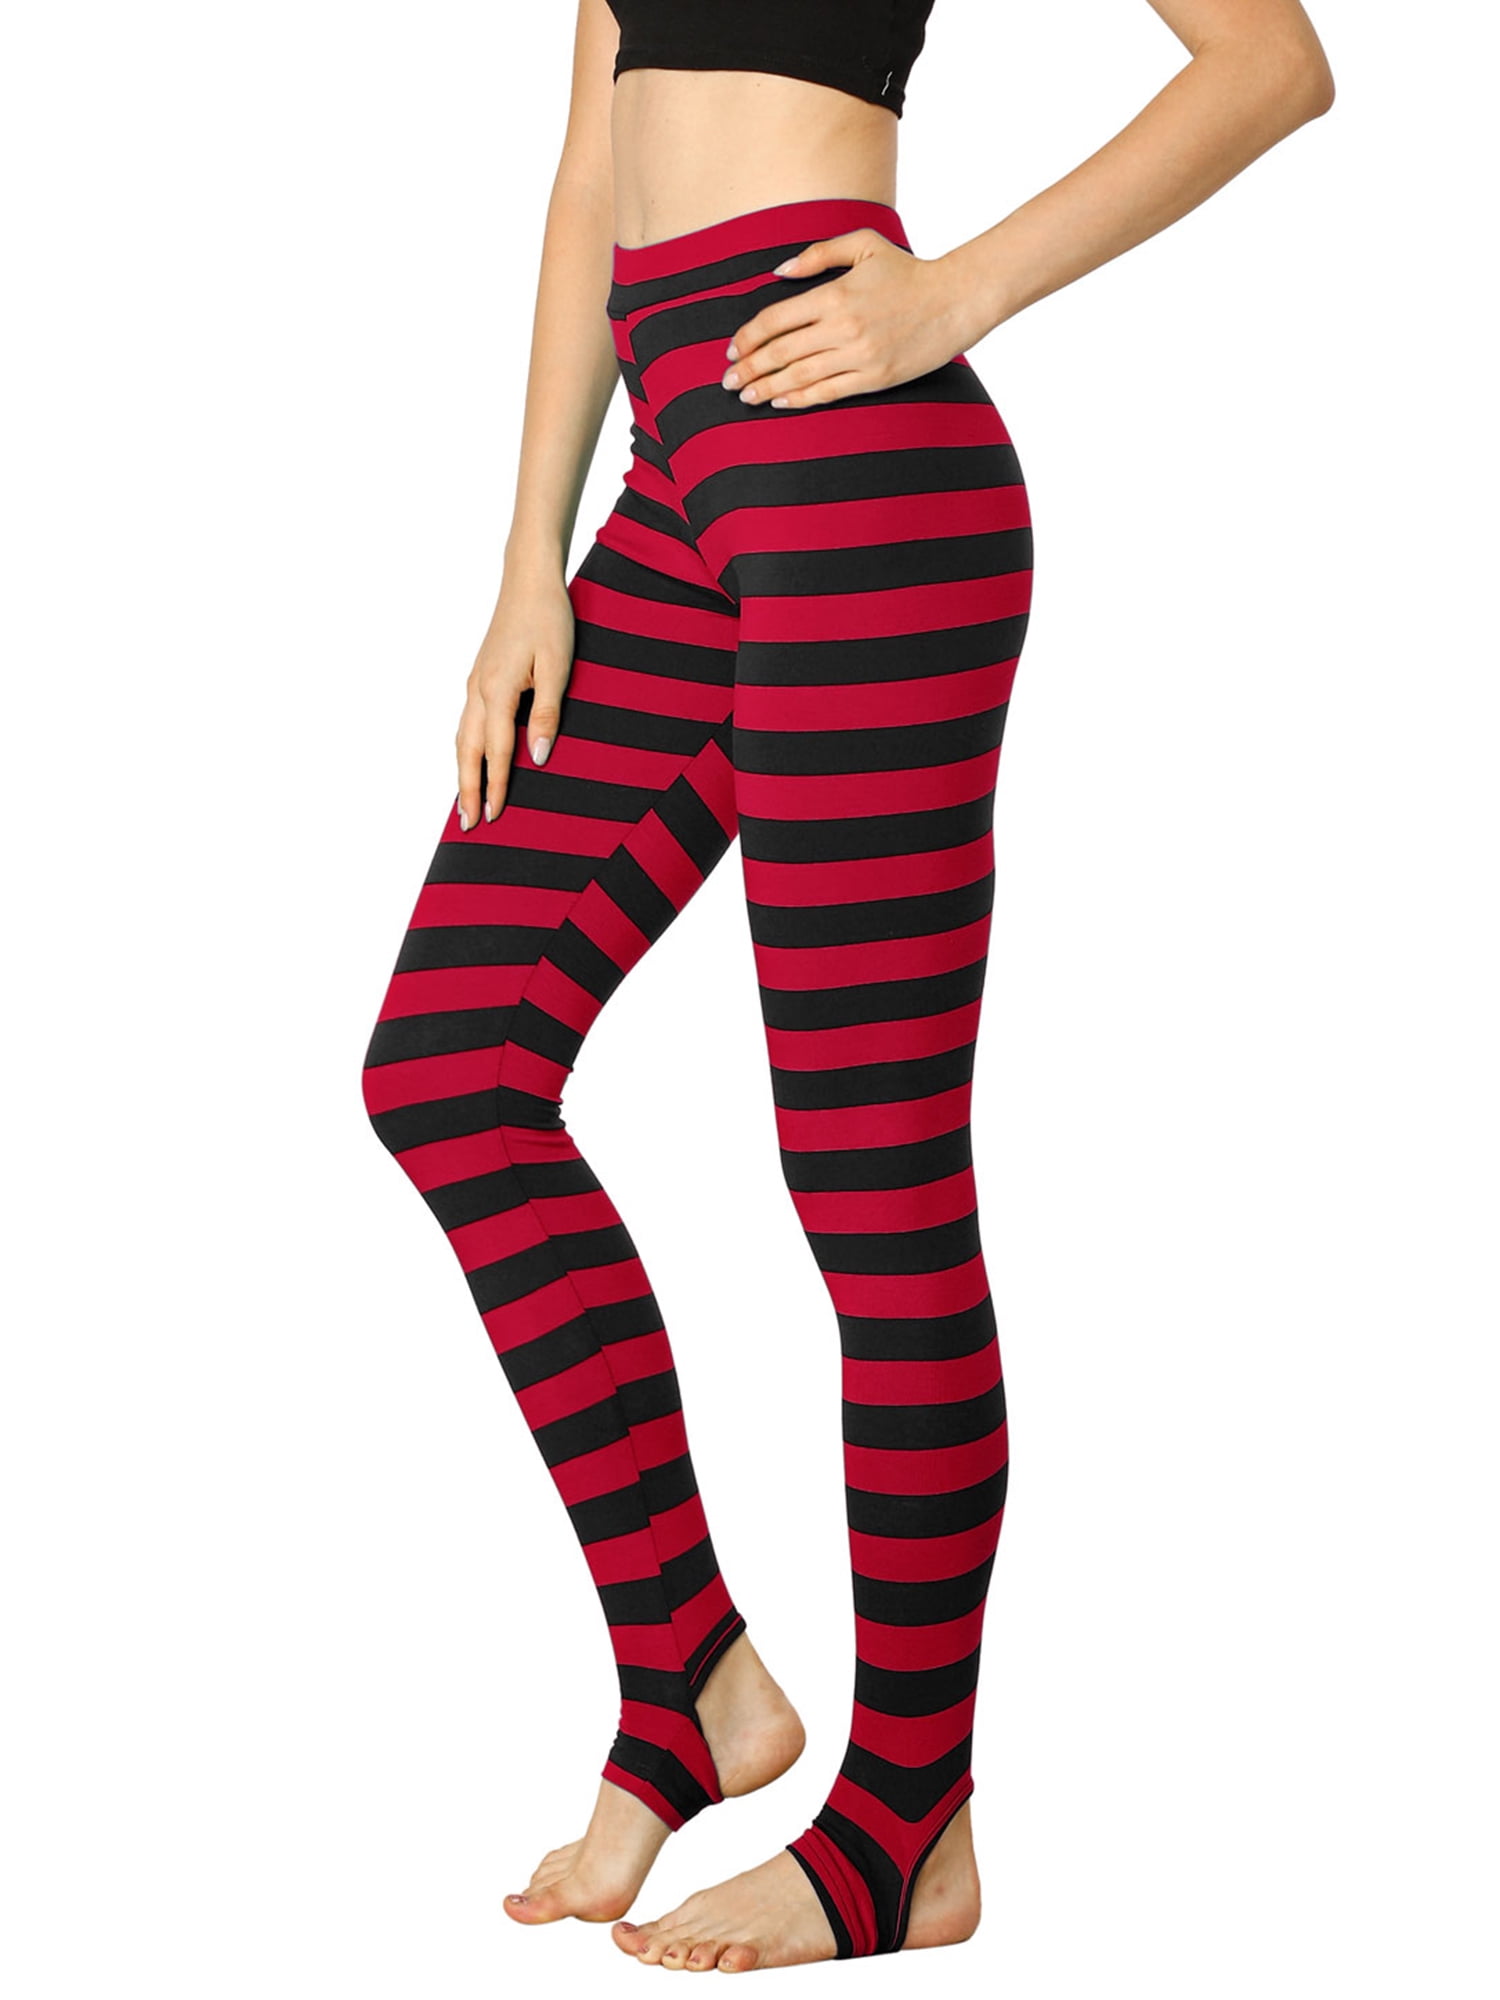 Blue and Red Horizontal Stripes Leggings